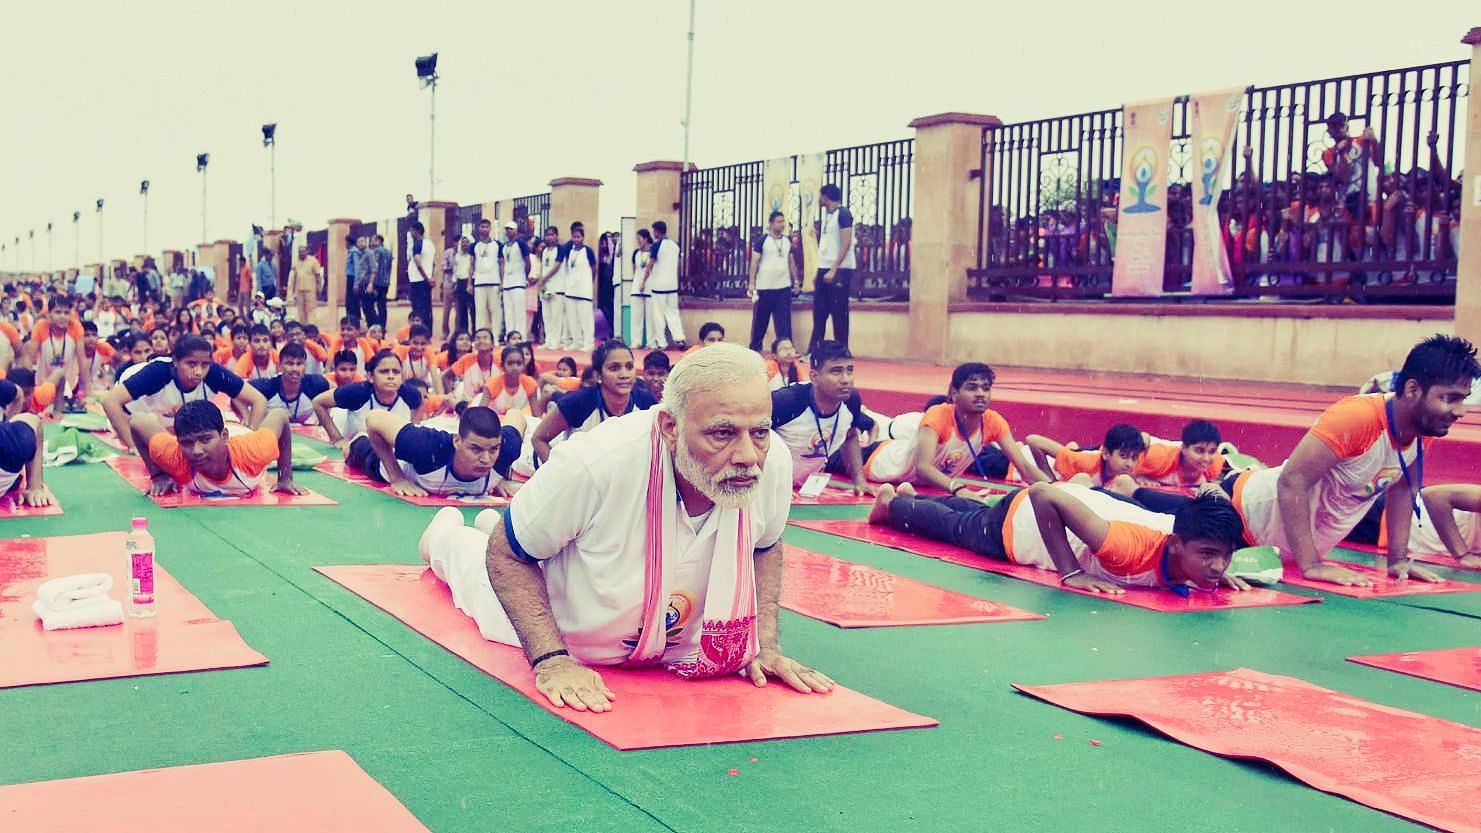 This Yoga Day, let’s look back at the last four years of prime ministerial flexibility.